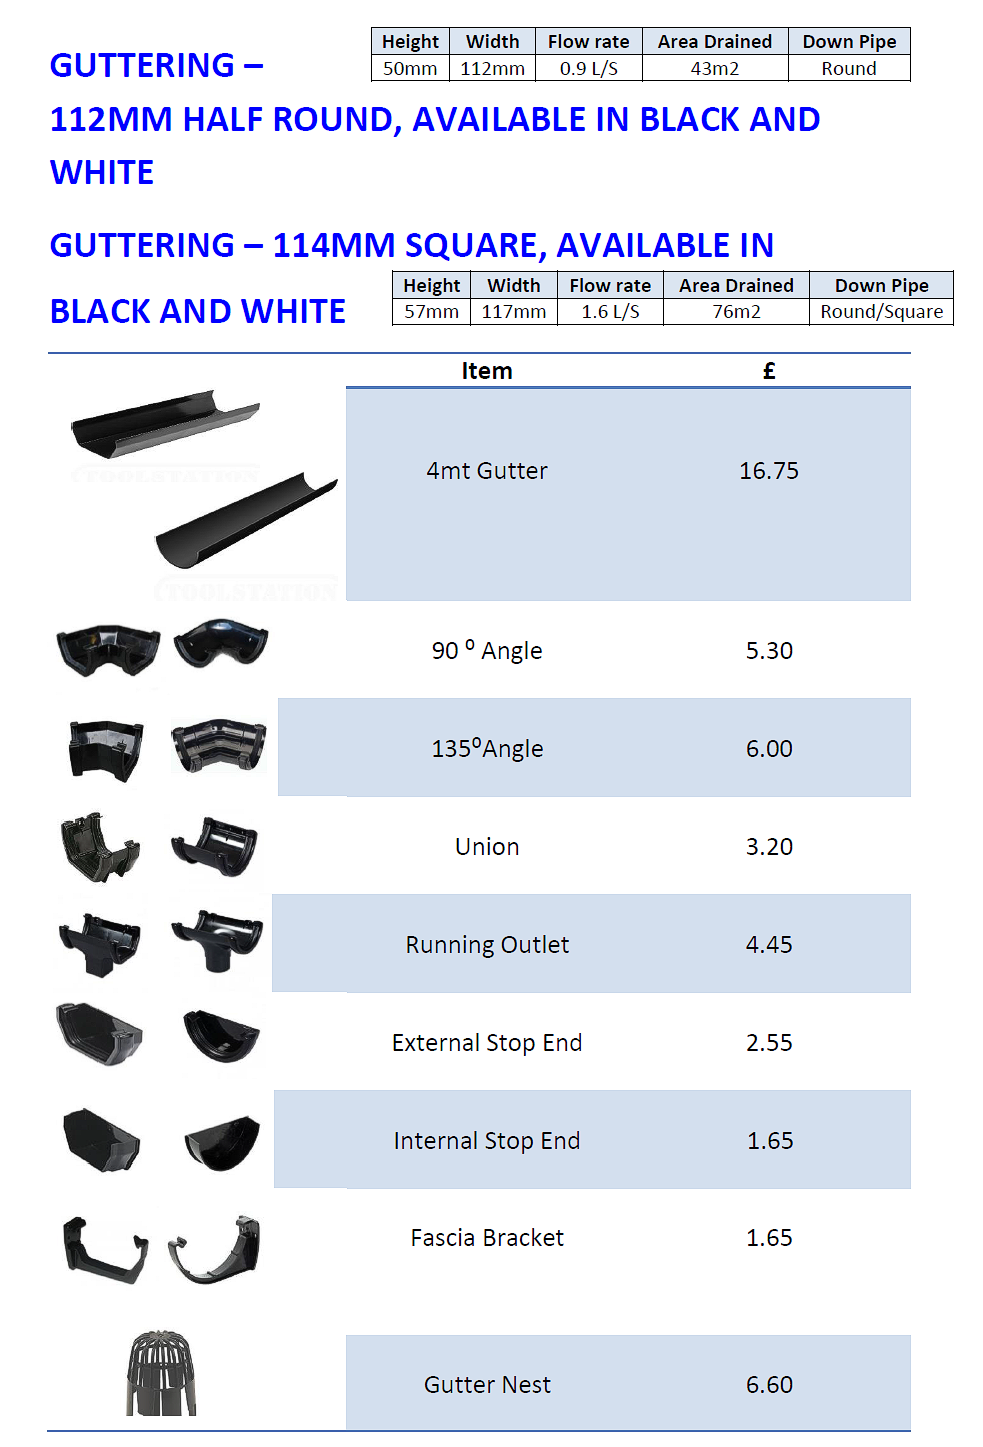 Guttering - 112mm Half Round, Available in Black and White